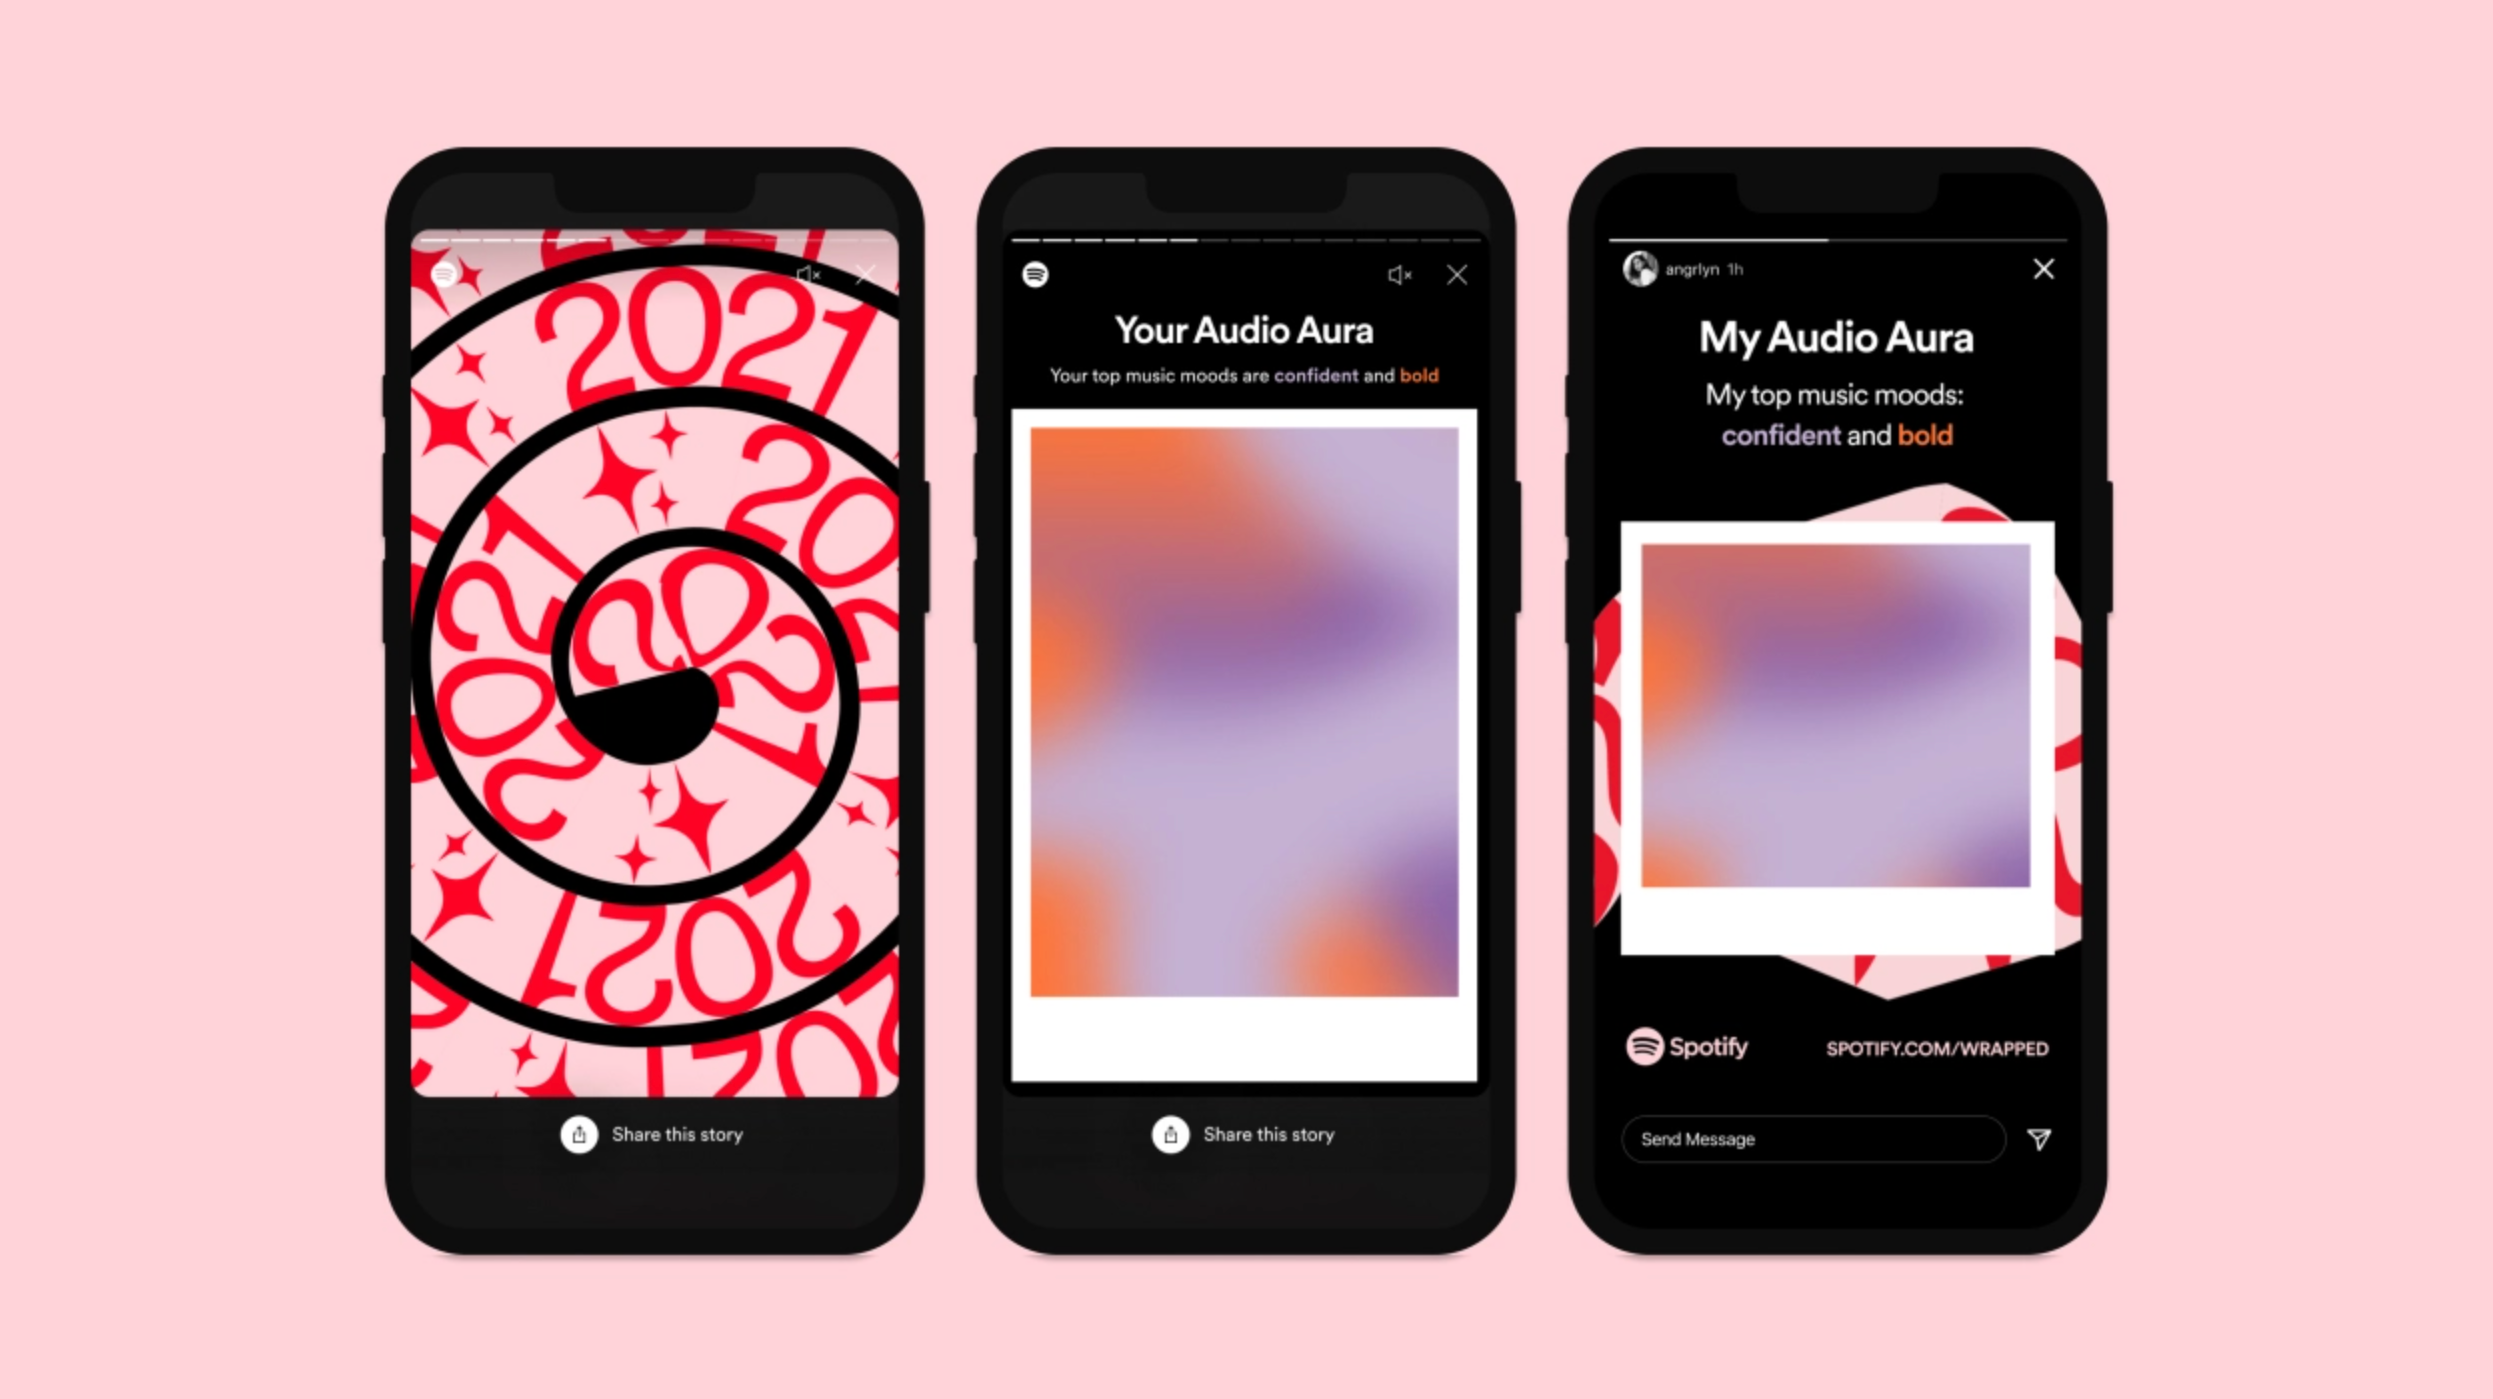 Spotify Wrapped now explores a users "Audio Aura"